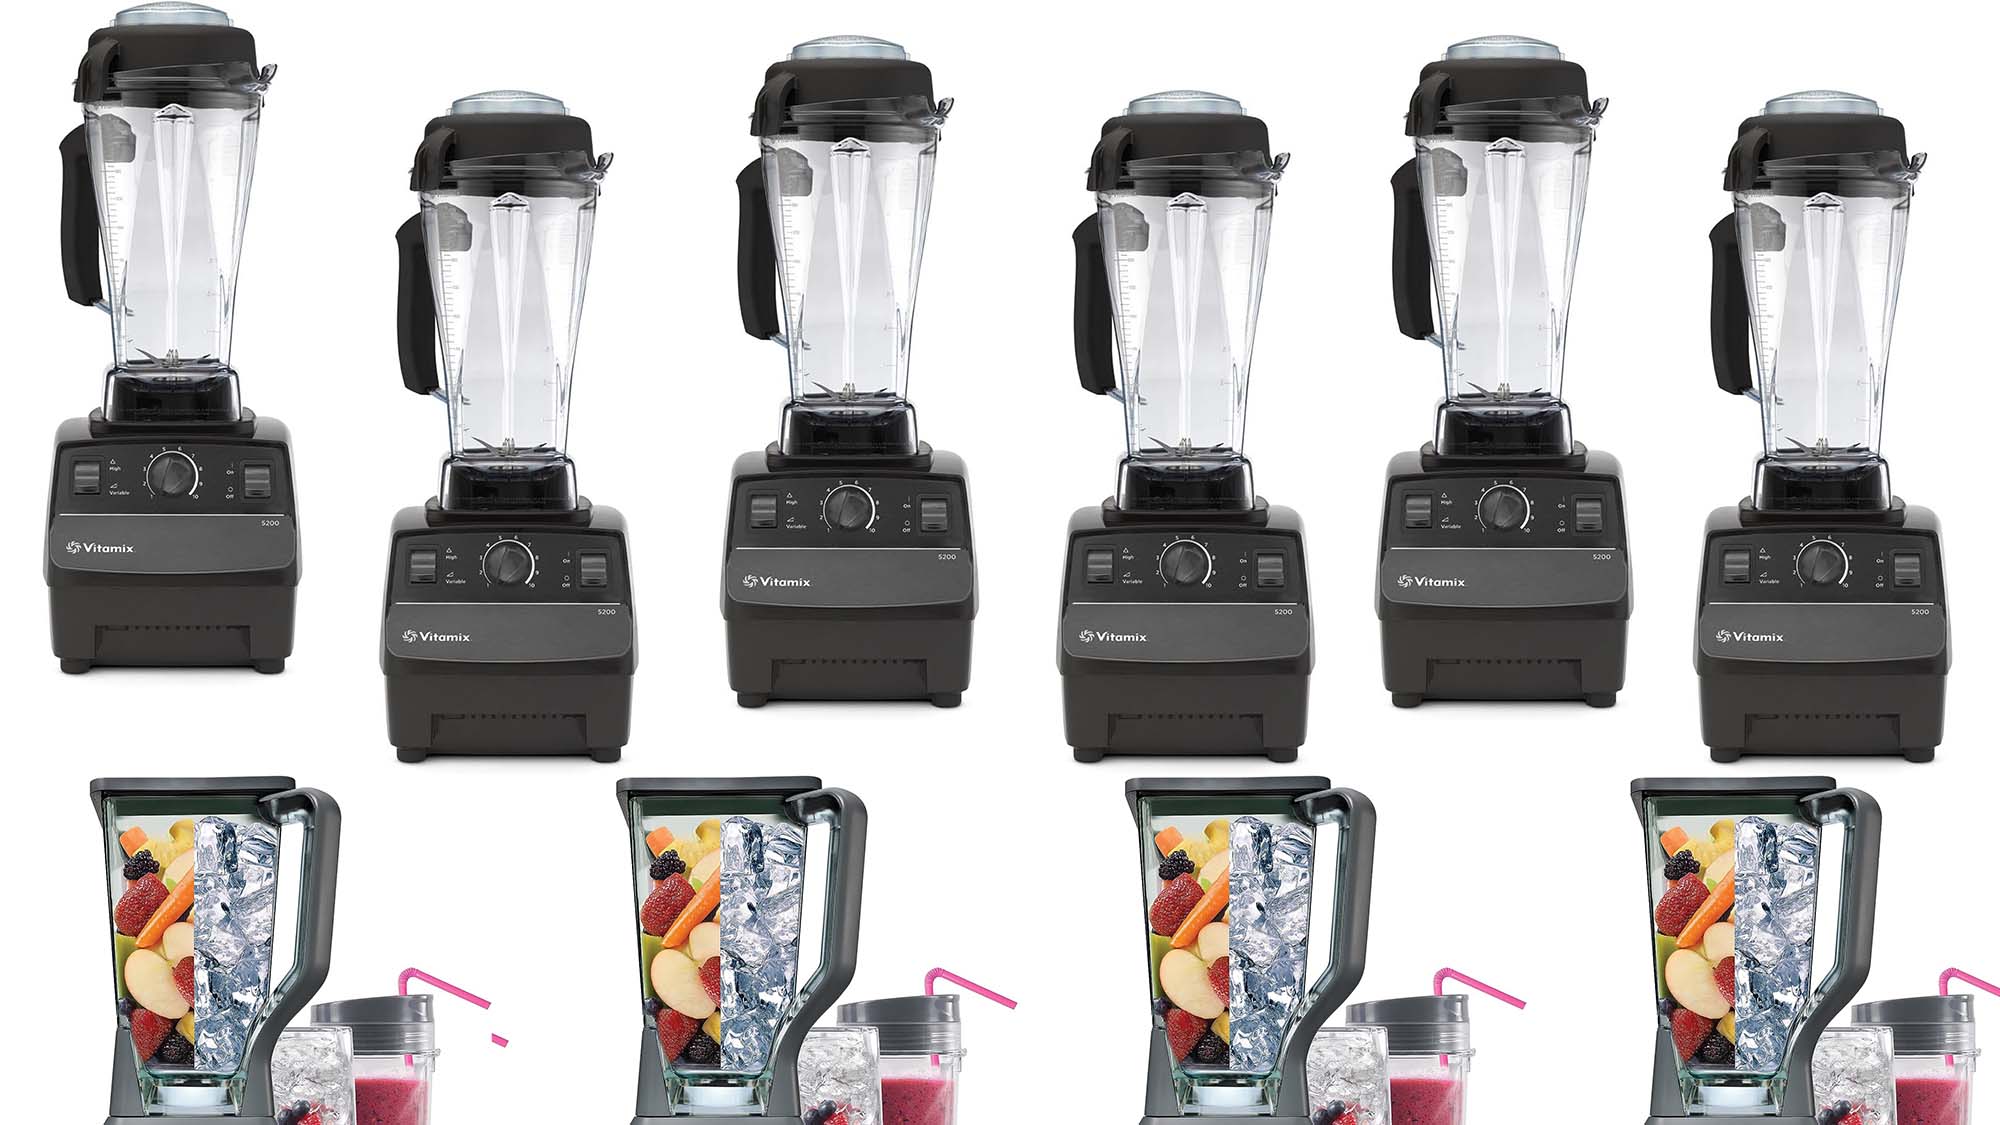 The Vitamix 5200 Blender is 45 % off this Prime Day.